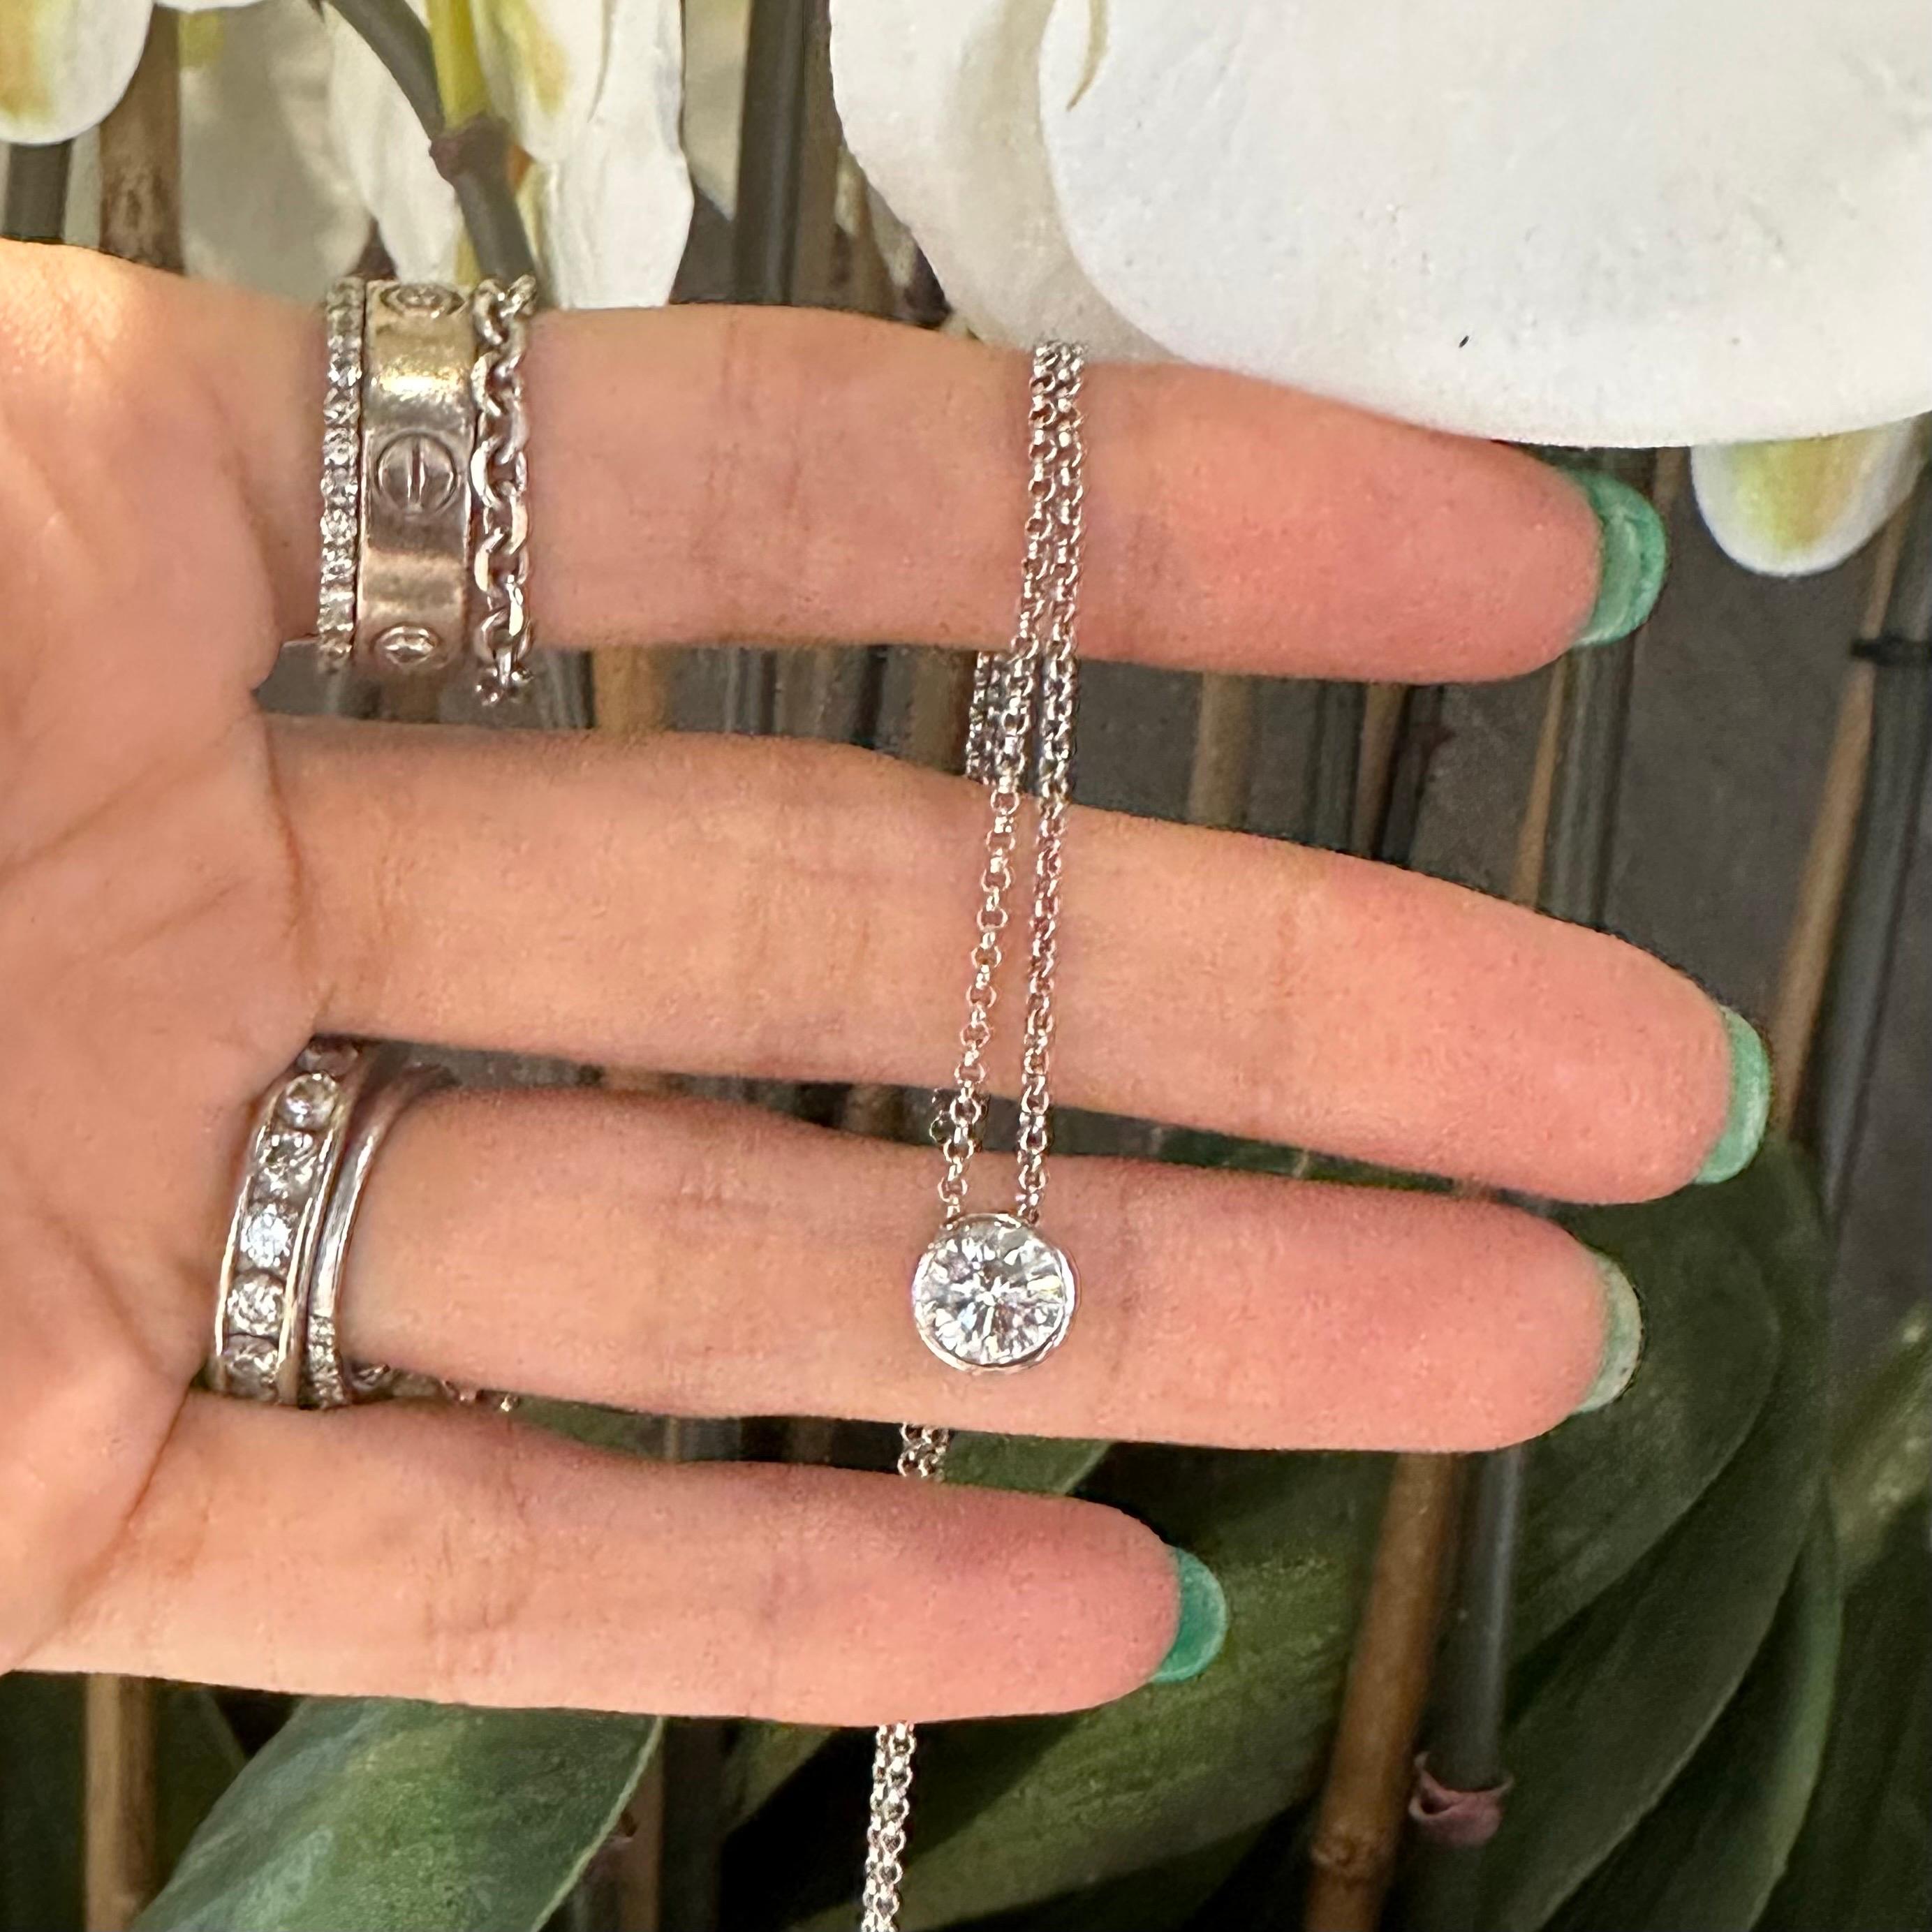 Beautiful 1ct Round diamond solitaire pendant attached on a white gold chain . suitable for any occasion. charming and elegant piece to gift yourself or someone you love. 